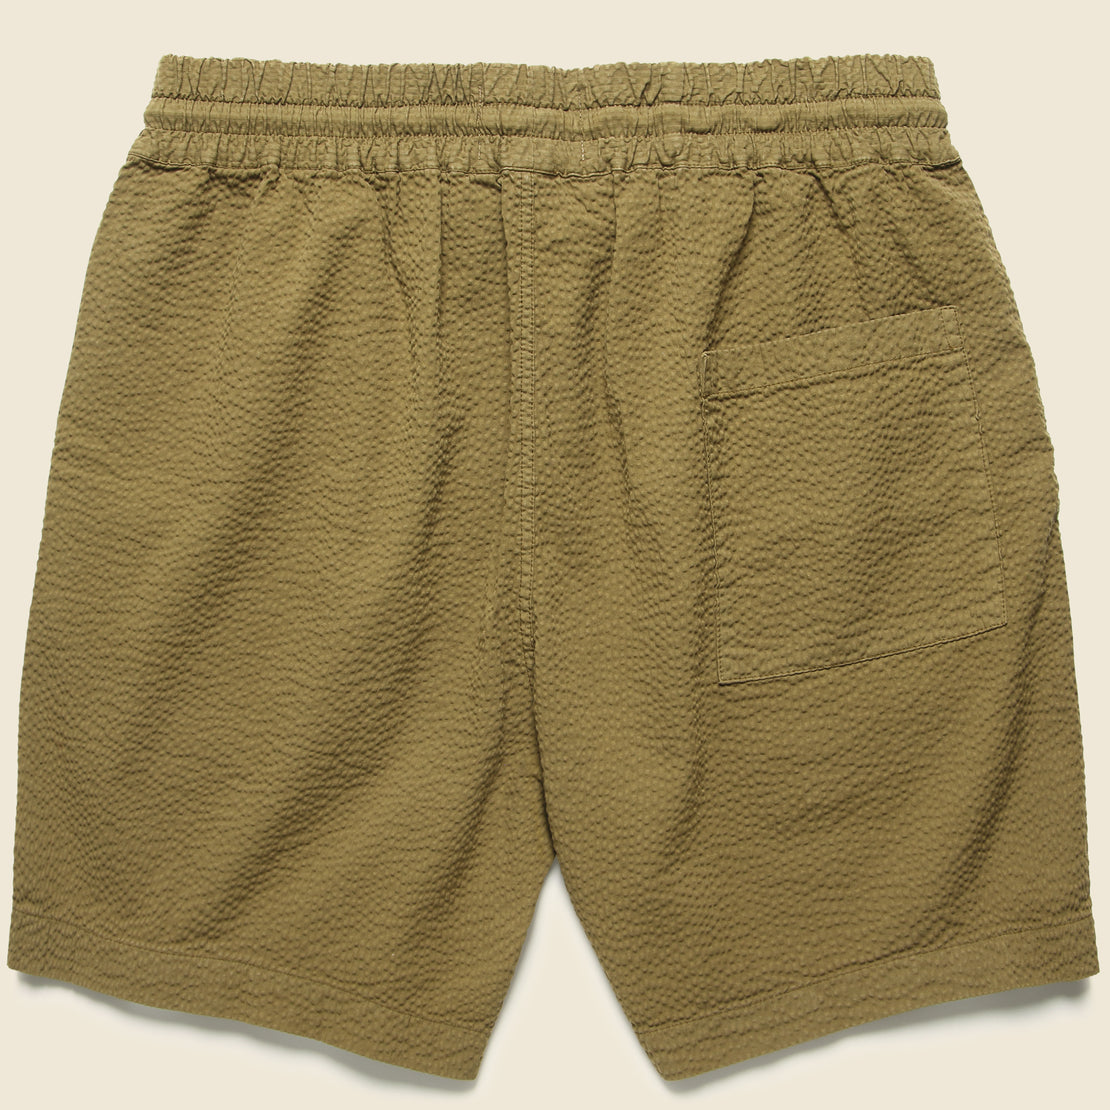 Atlantico Seersucker Shorts - Olive - Portuguese Flannel - STAG Provisions - Shorts - Lounge